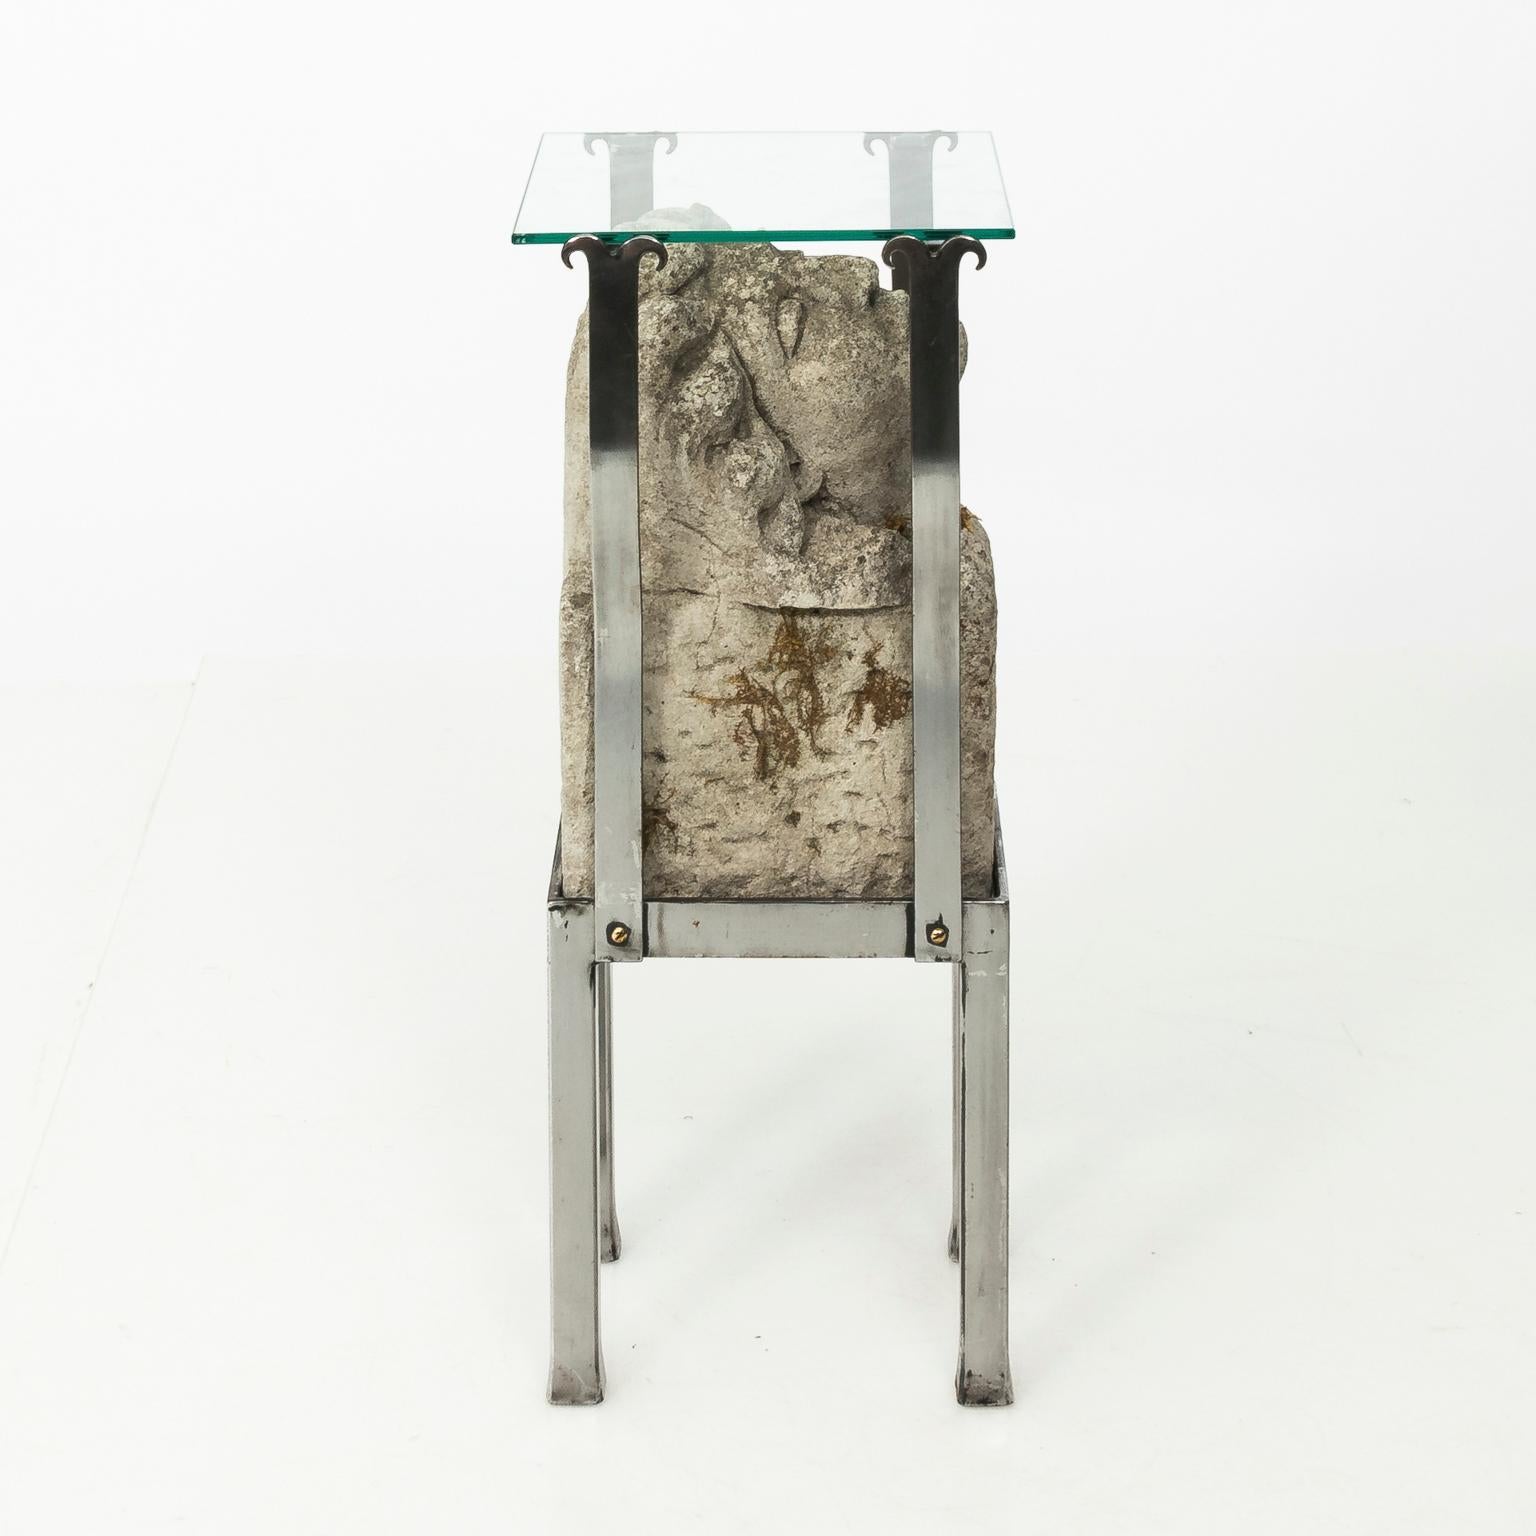 Contemporary set of two steel and glass side tables with carved stone head bases. These carved stone heads can be traced to a circa 1860 Victorian stable in Derbyshire, England.
   